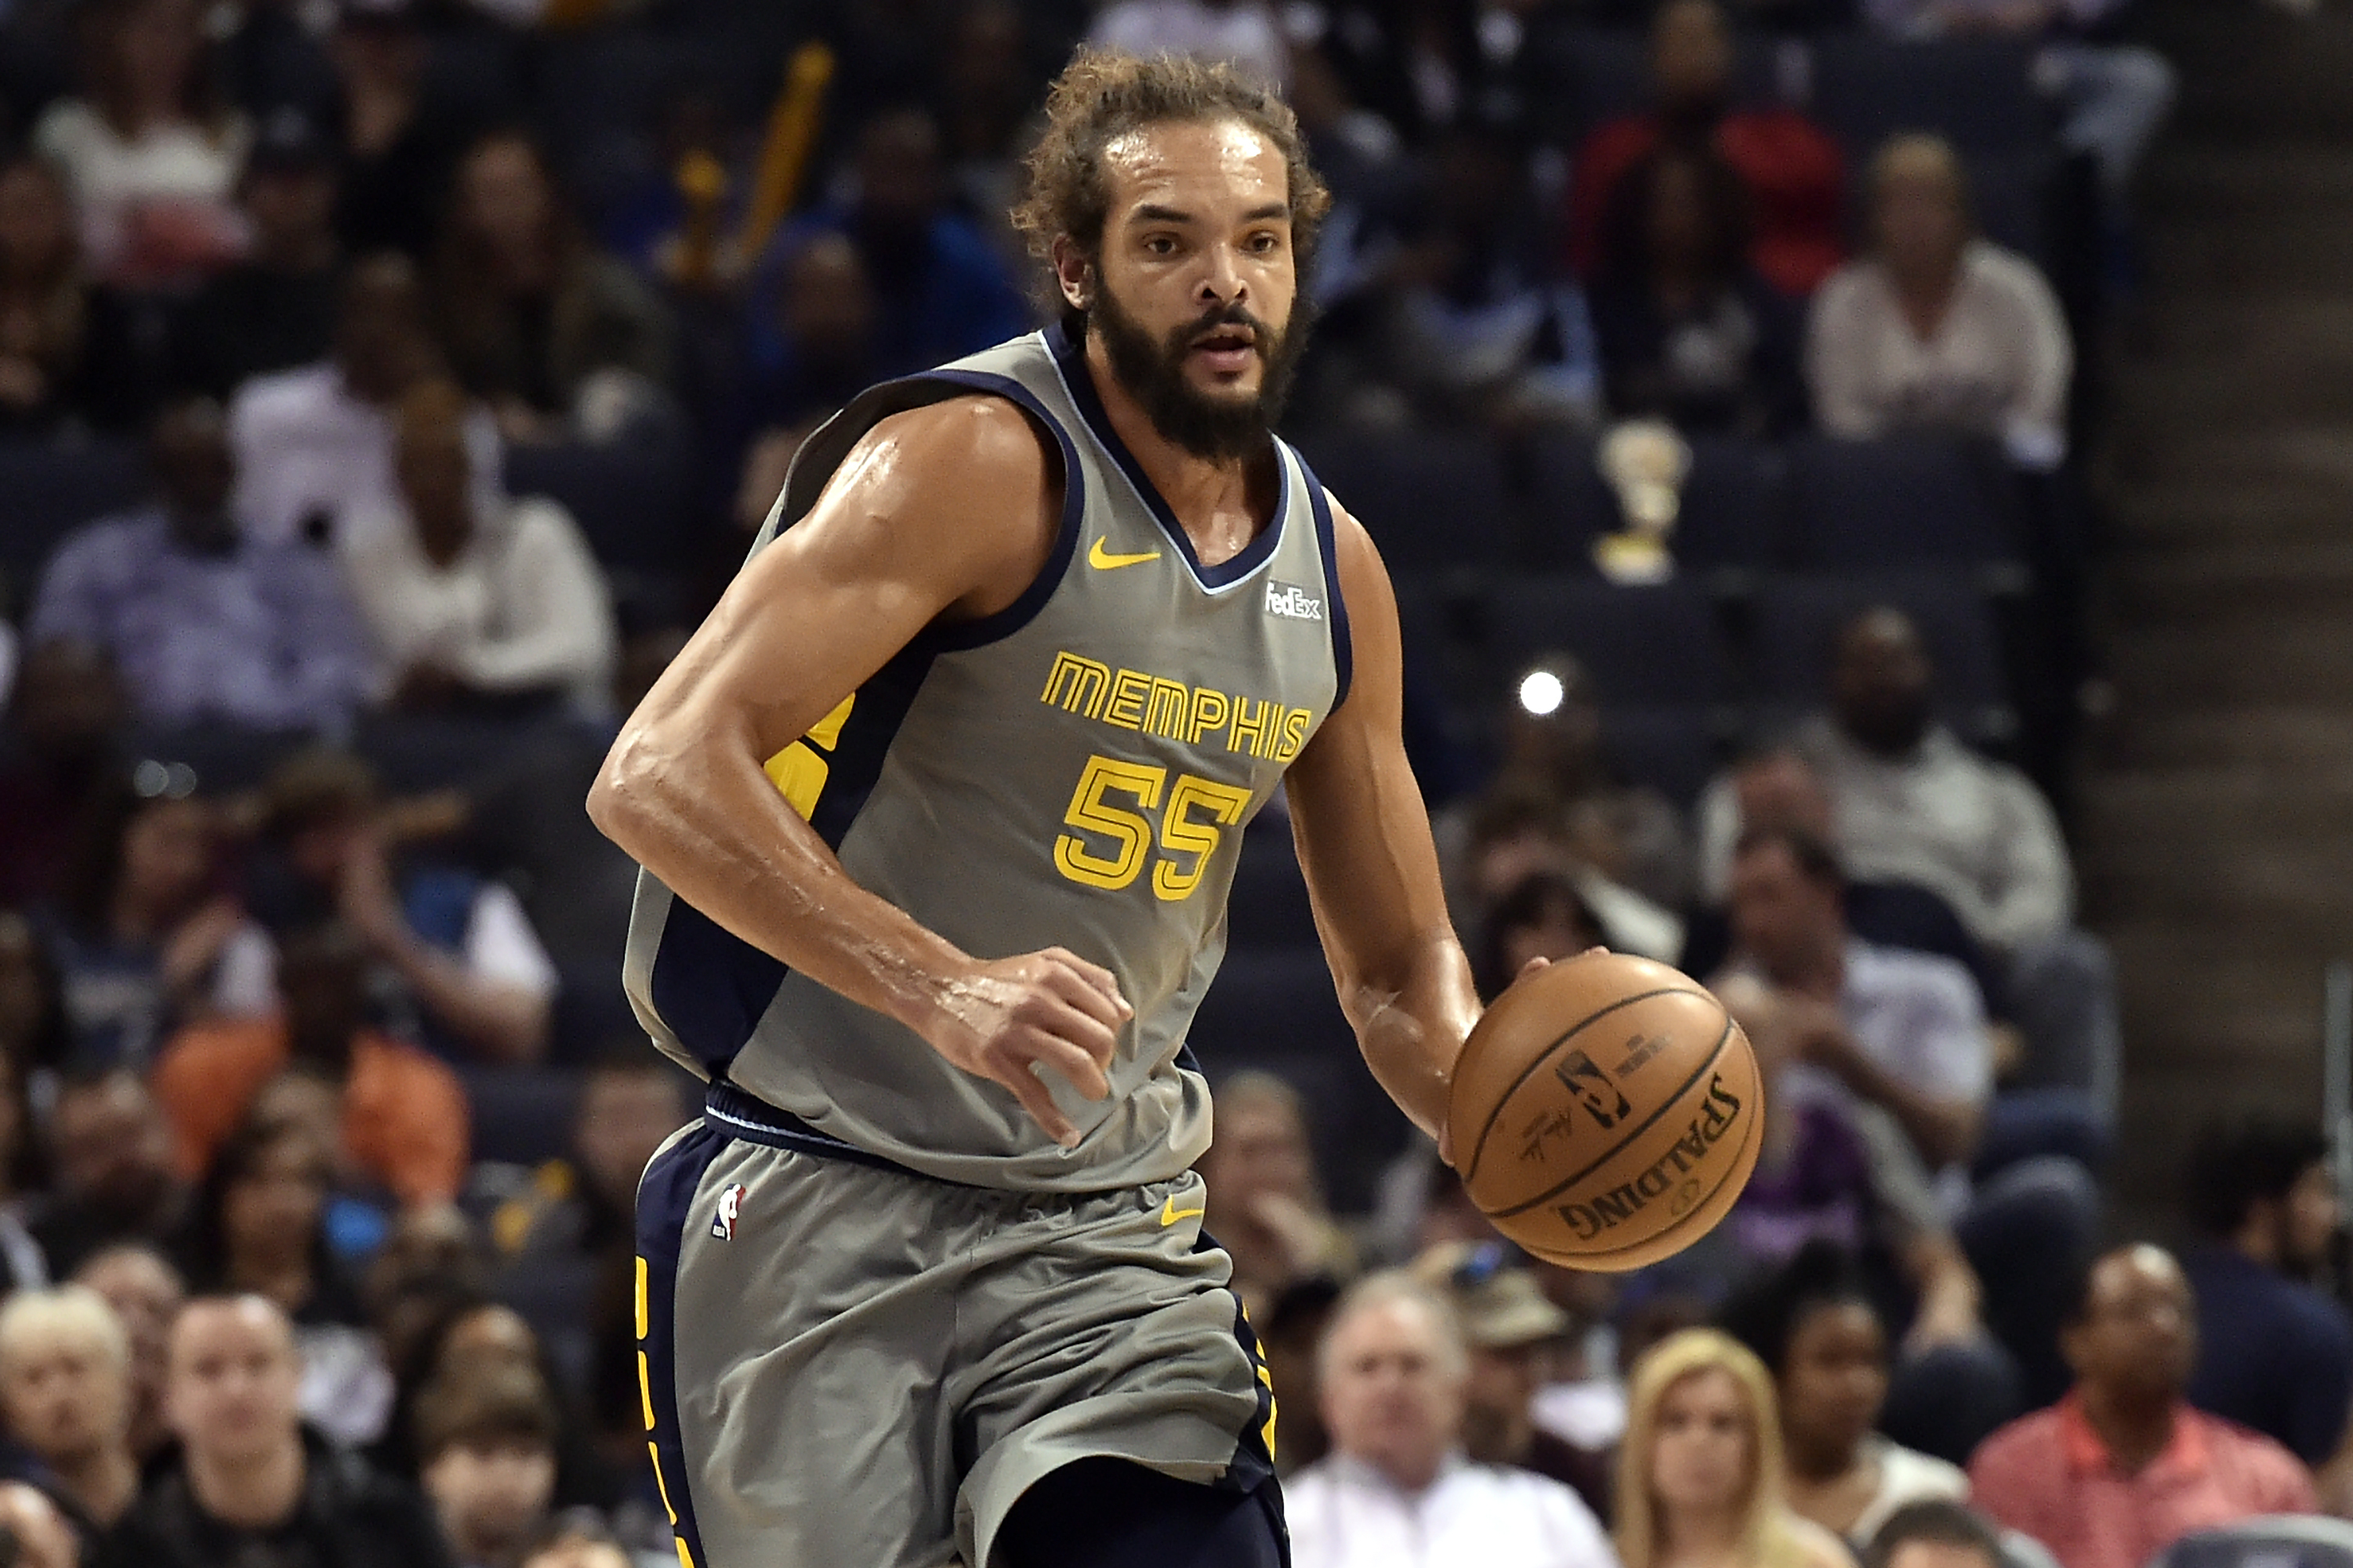 Joakim Noah Likely Headed Toward Retirement After Clippers Let